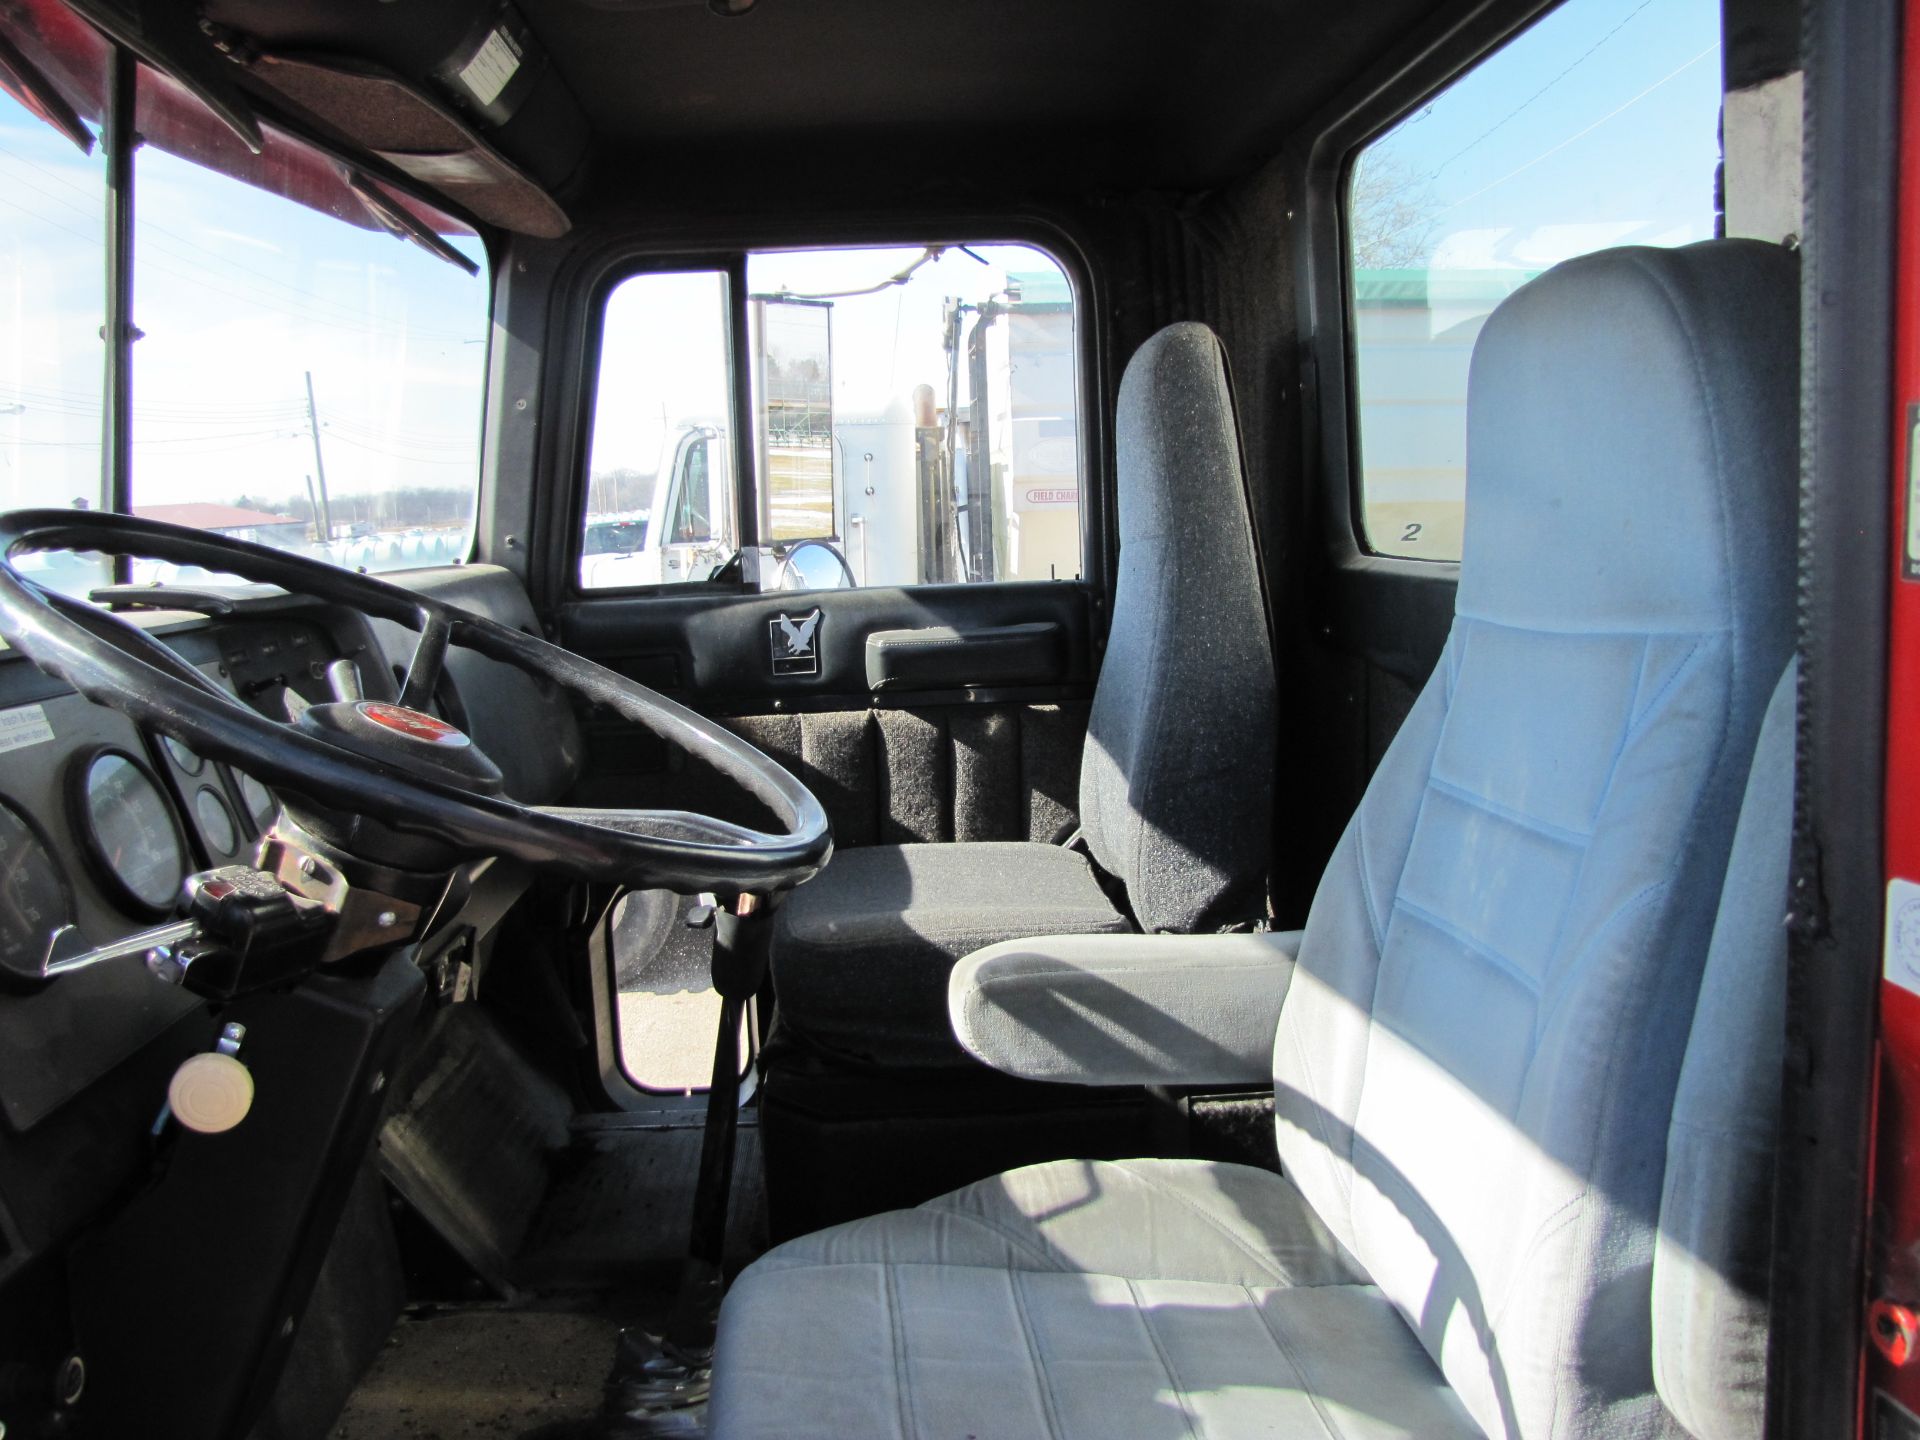 1988 International Eagle 9300, day cab, air ride, wet kit, Cat 3406P, Fuller 13-speed trans - Image 79 of 88